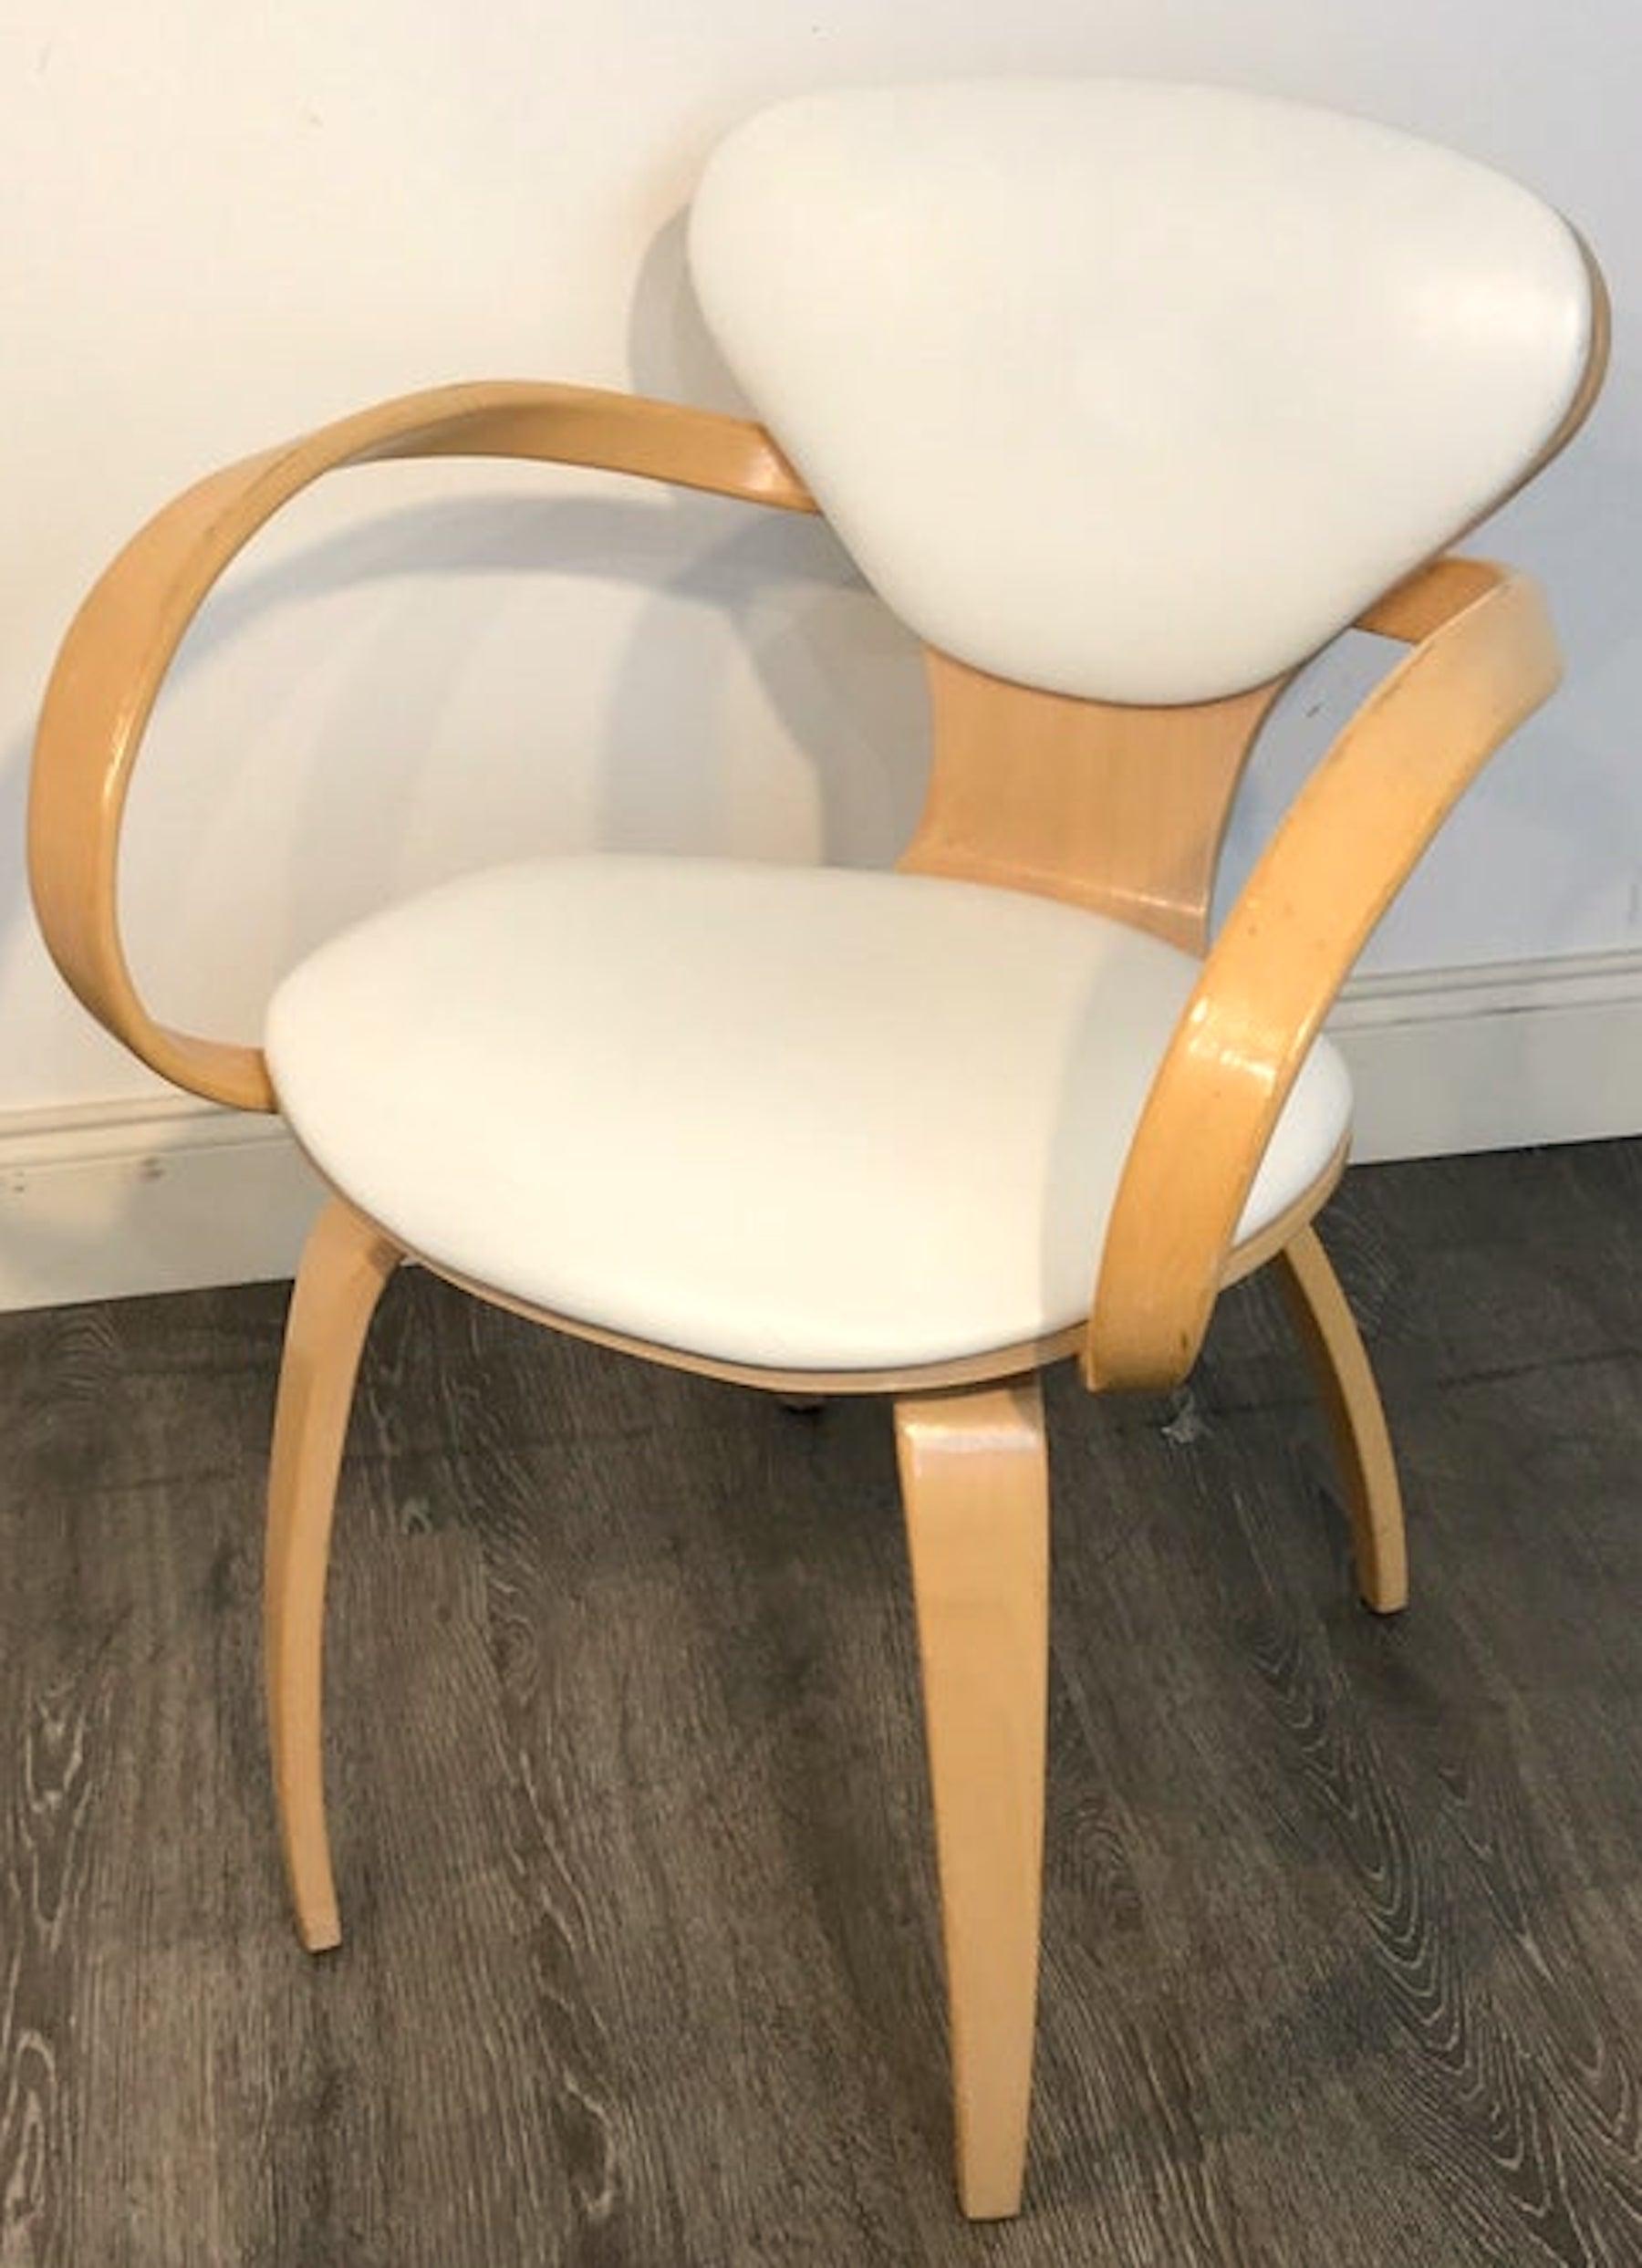 Cherner style natural beech armchair with white leather upholstery, 2 available
Sold individually
The seat is 19